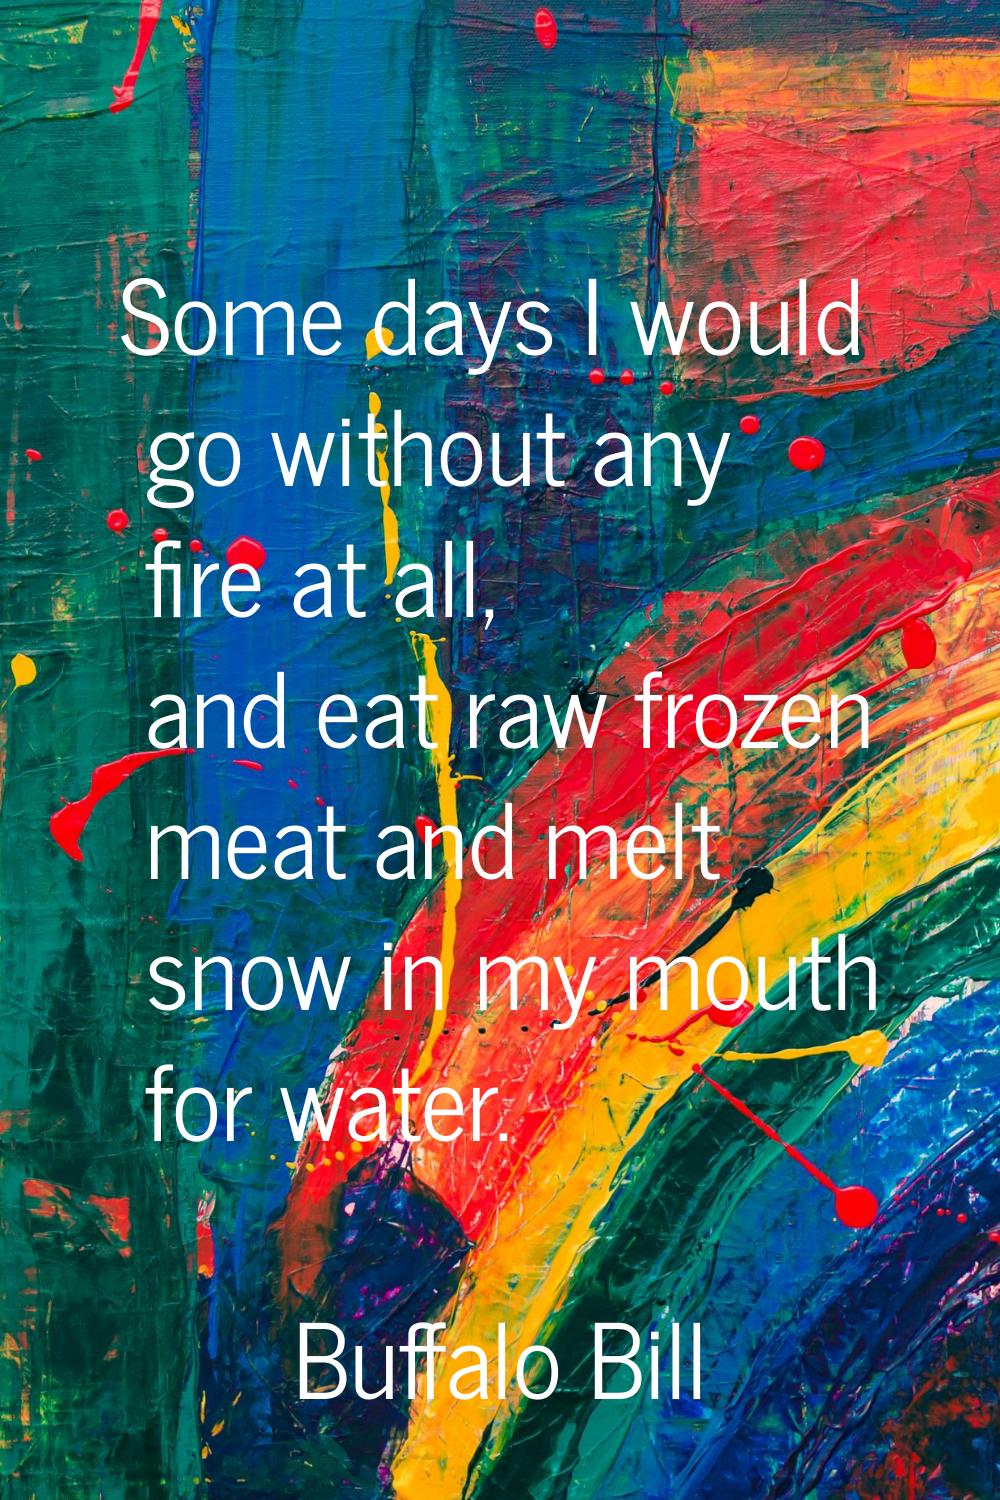 Some days I would go without any fire at all, and eat raw frozen meat and melt snow in my mouth for